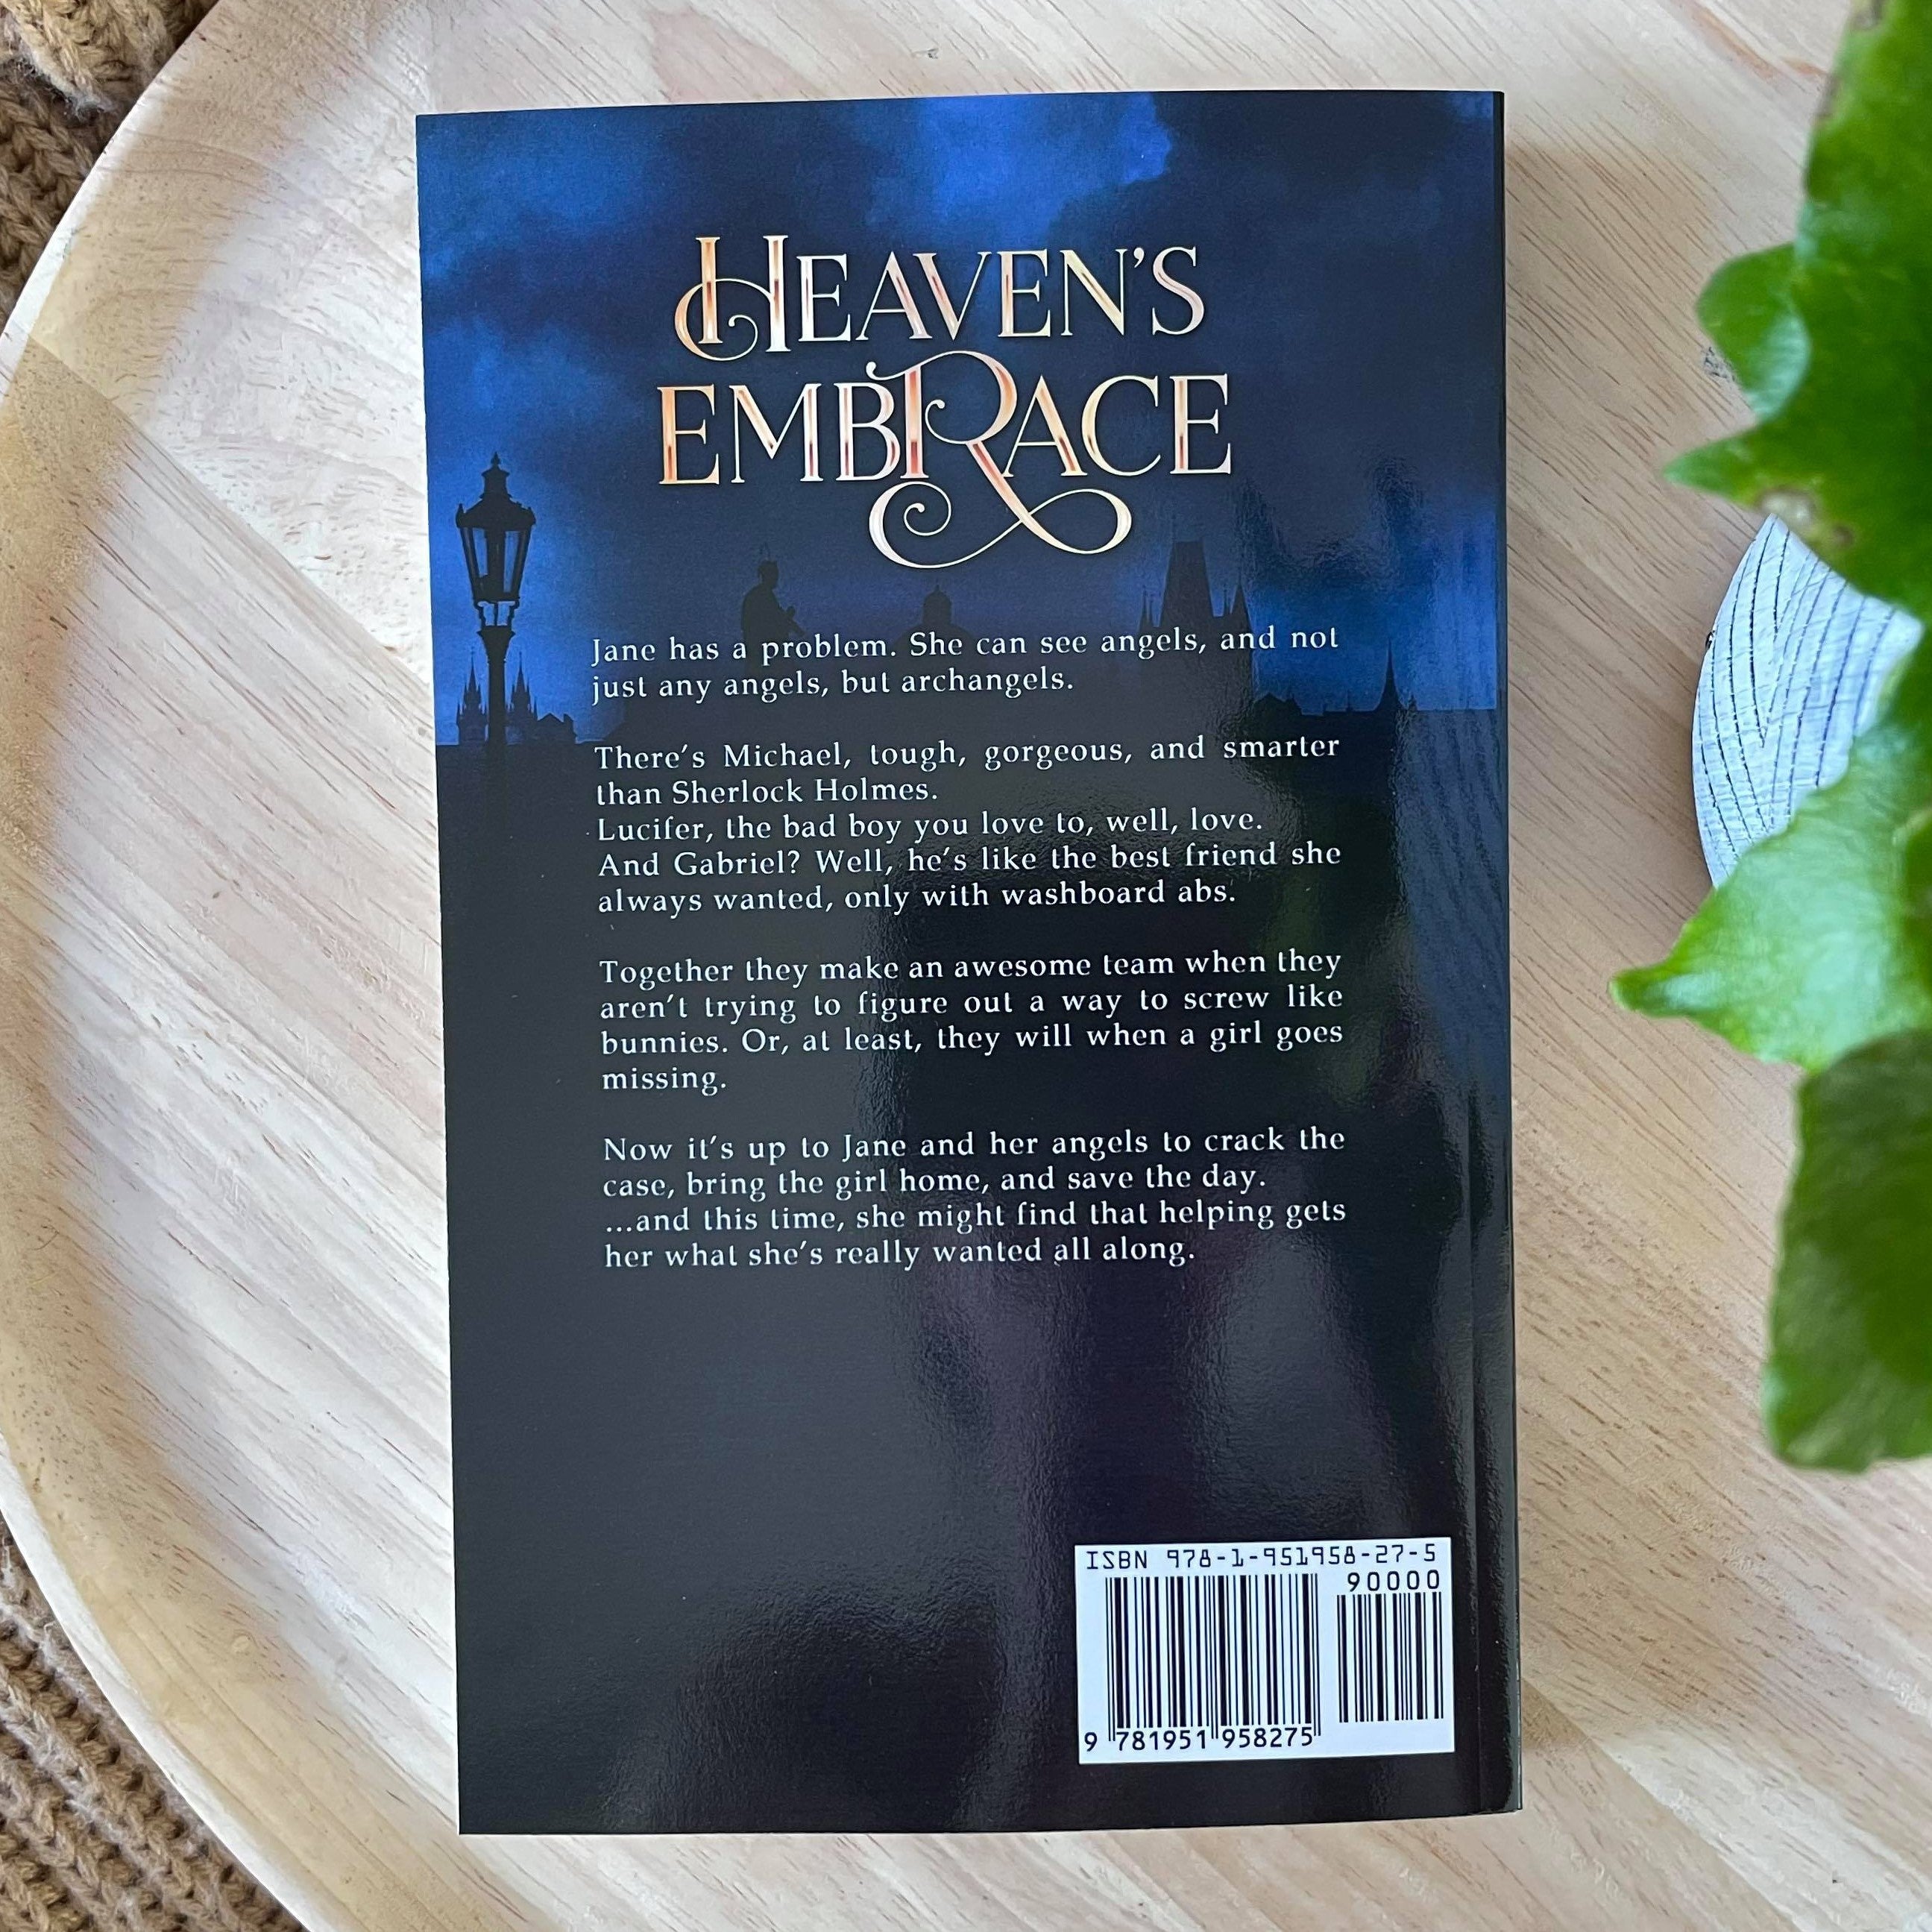 Heaven's Embrace by Erin Bedford & J.A. Cipriano